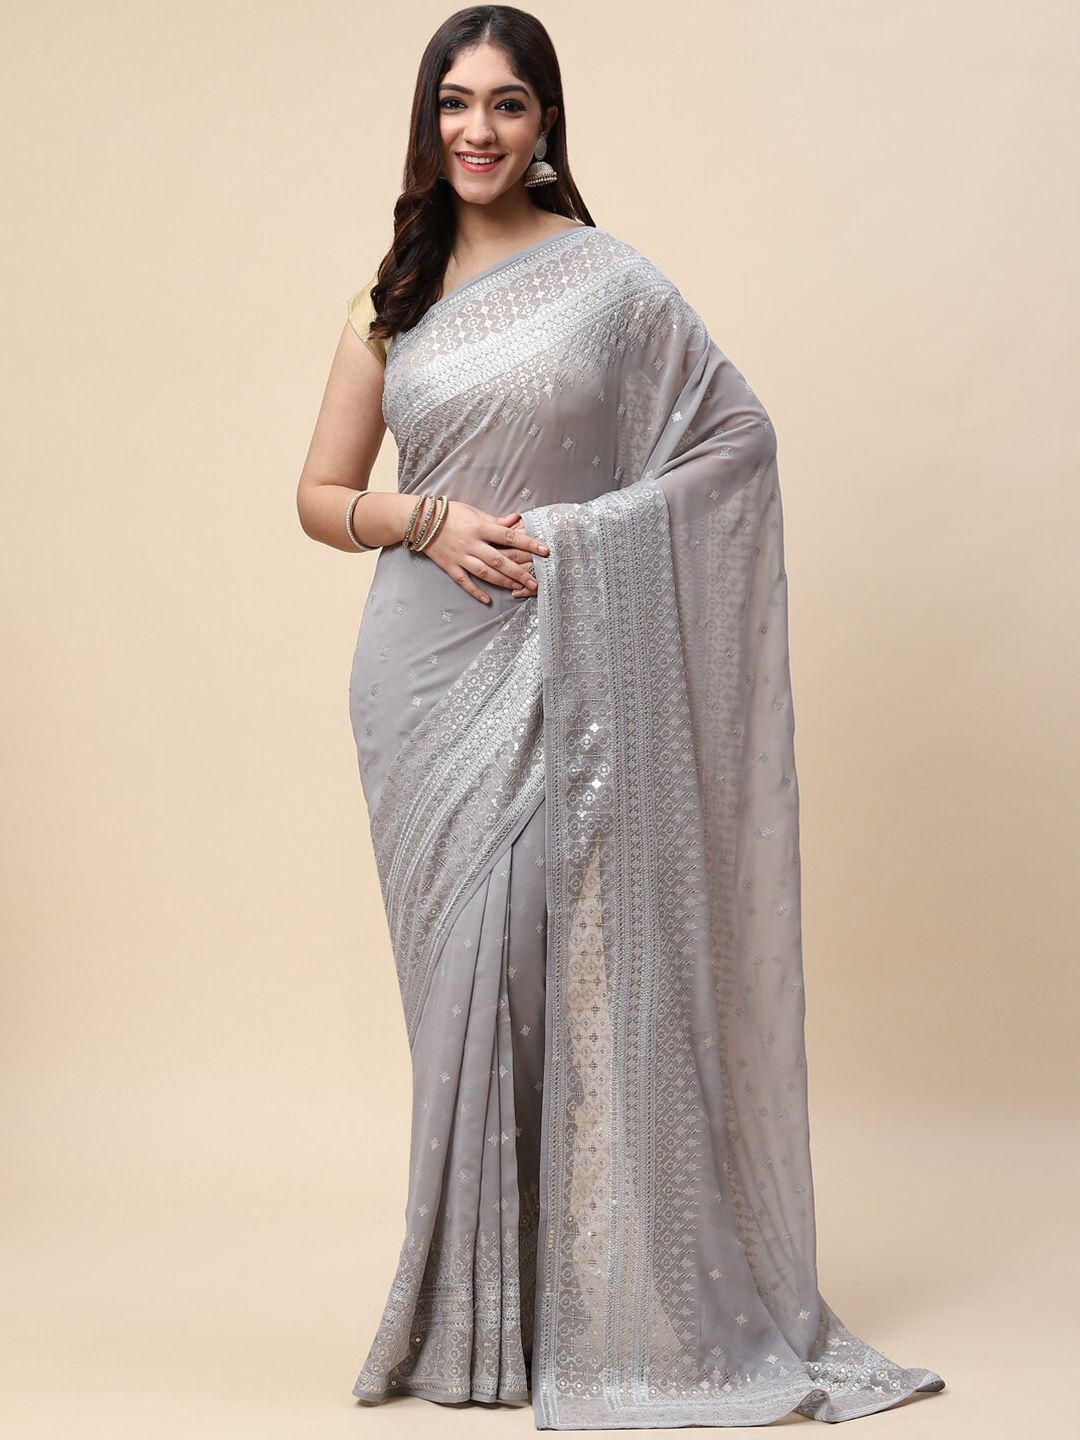 Meena Bazaar Grey & White Floral Embroidered Saree Price in India